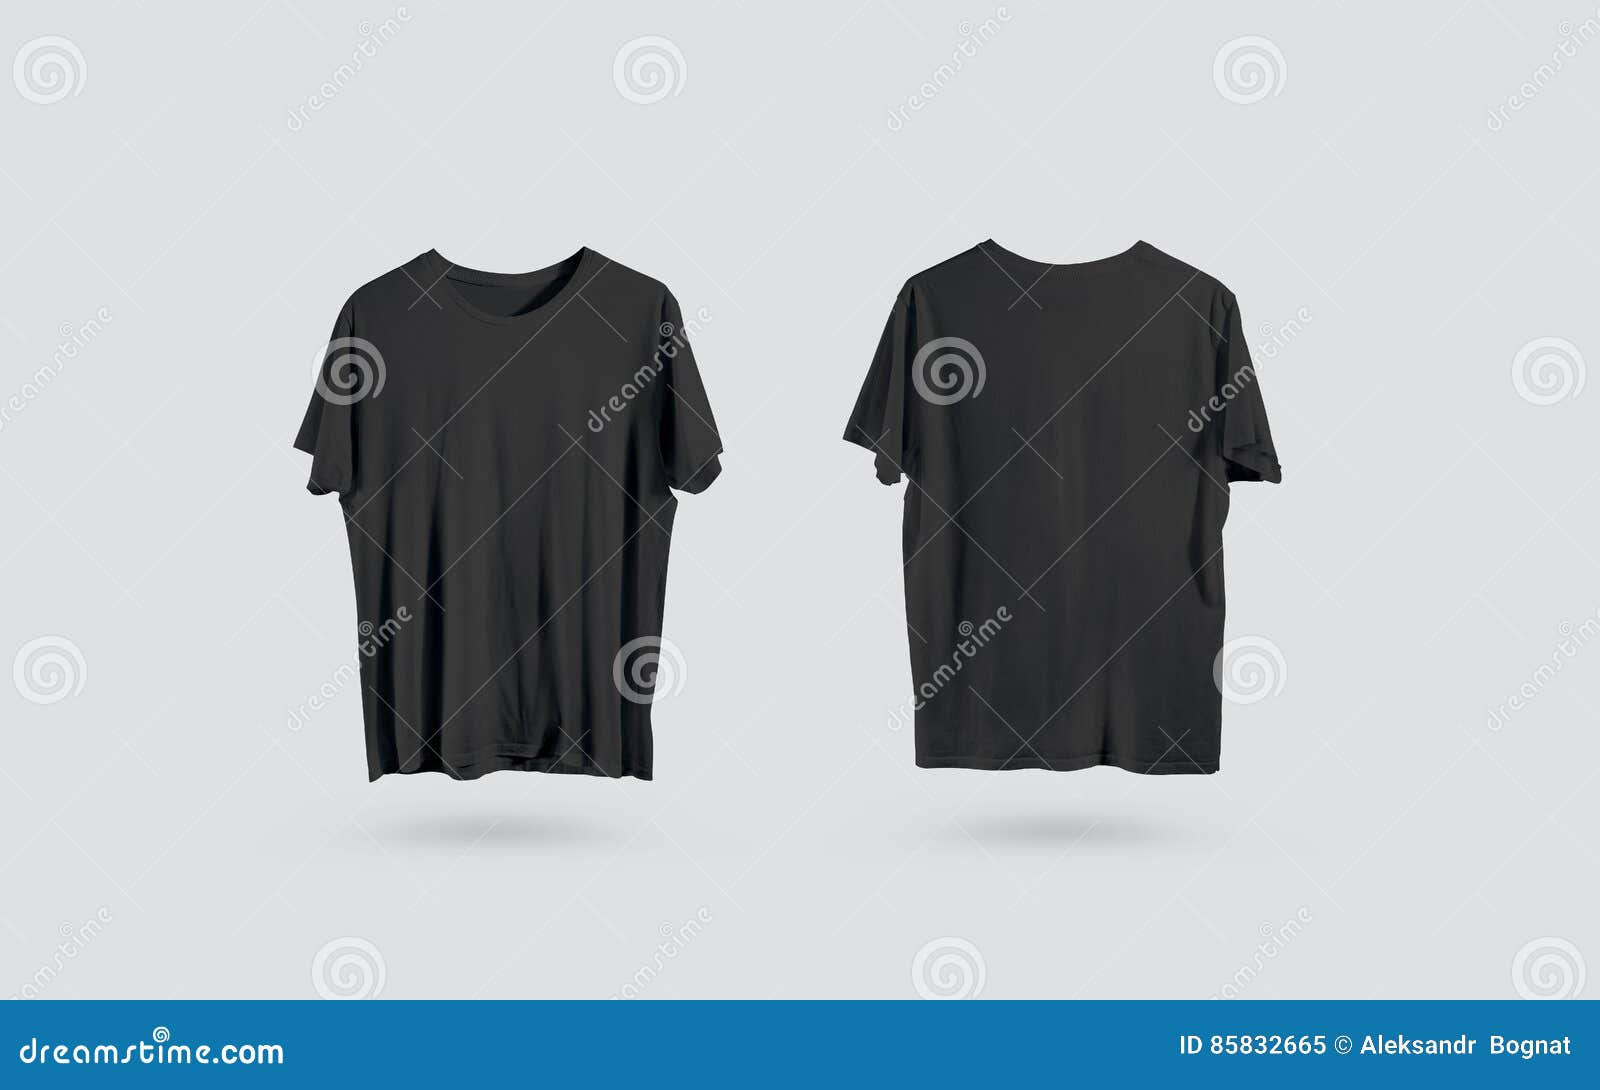 Download Blank Black T-shirt Front And Back Side View, Design ...